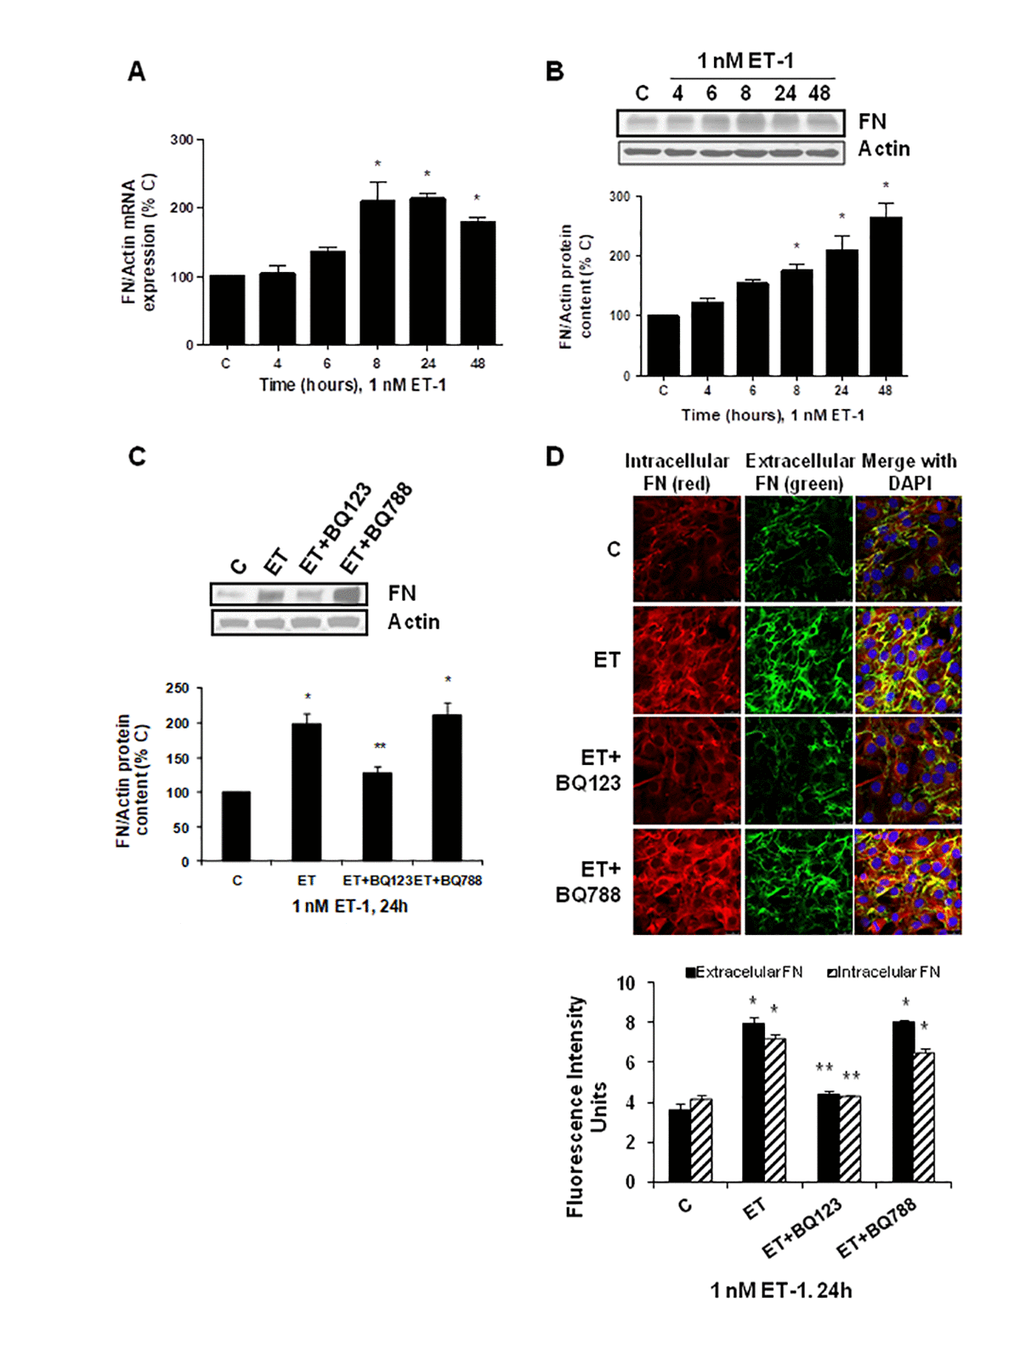 Endothelin-1 increases FN expression in mouse myoblasts (C2C12) through ETA receptor. Cells were incubated with 1 nM ET-1 at different times. Then, FN mRNA expression was assessed by RT-qPCR (panel A) and FN protein content by Western blot (panel B). To study the ET receptor implicated, cells were incubated with 100 nM BQ-123 (BQ123) or 100 nM BQ-788 (BQ788) added 30 min before ET-1 (1 nM), and then incubated for 24h. Then, FN protein content (panel C) as well as intracellular FN (in red) and extracellular FN (in green) expression (panel D) were studied by Western and immunofluorescence, respectively. In the experiments of the analysis of protein content, a representative Western blot is shown at the top with the densitometric analysis below (panel B,C). Values are the mean±SEM of 6 independent experiments, *pC), and **p